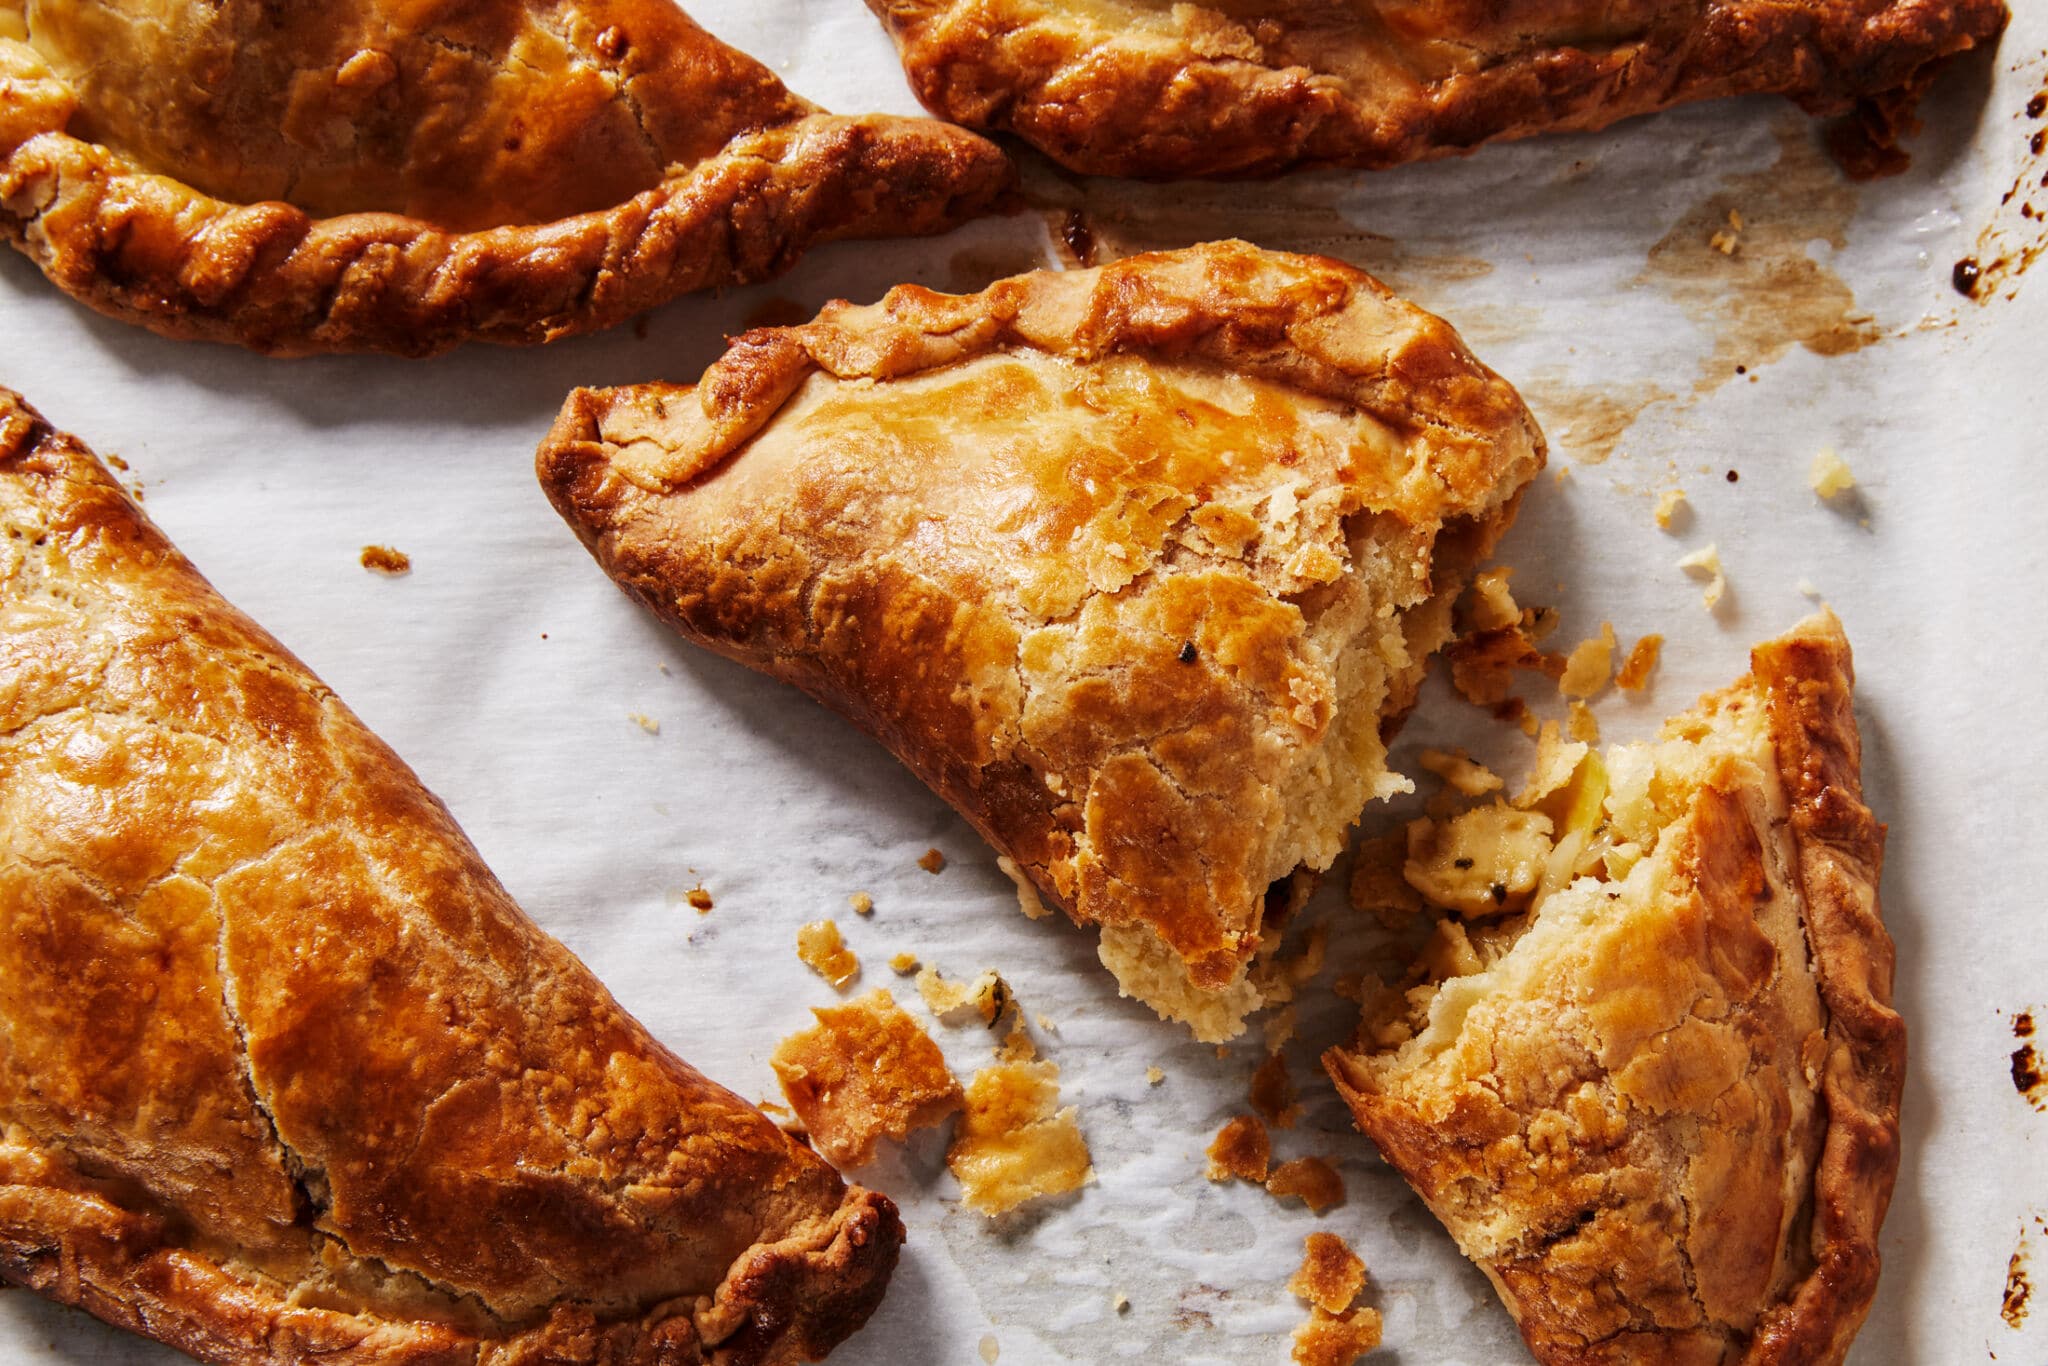 A close-up shot at Potato and Cheddar Pastries shows that they are baked until golden brown with crispy flaky crust.